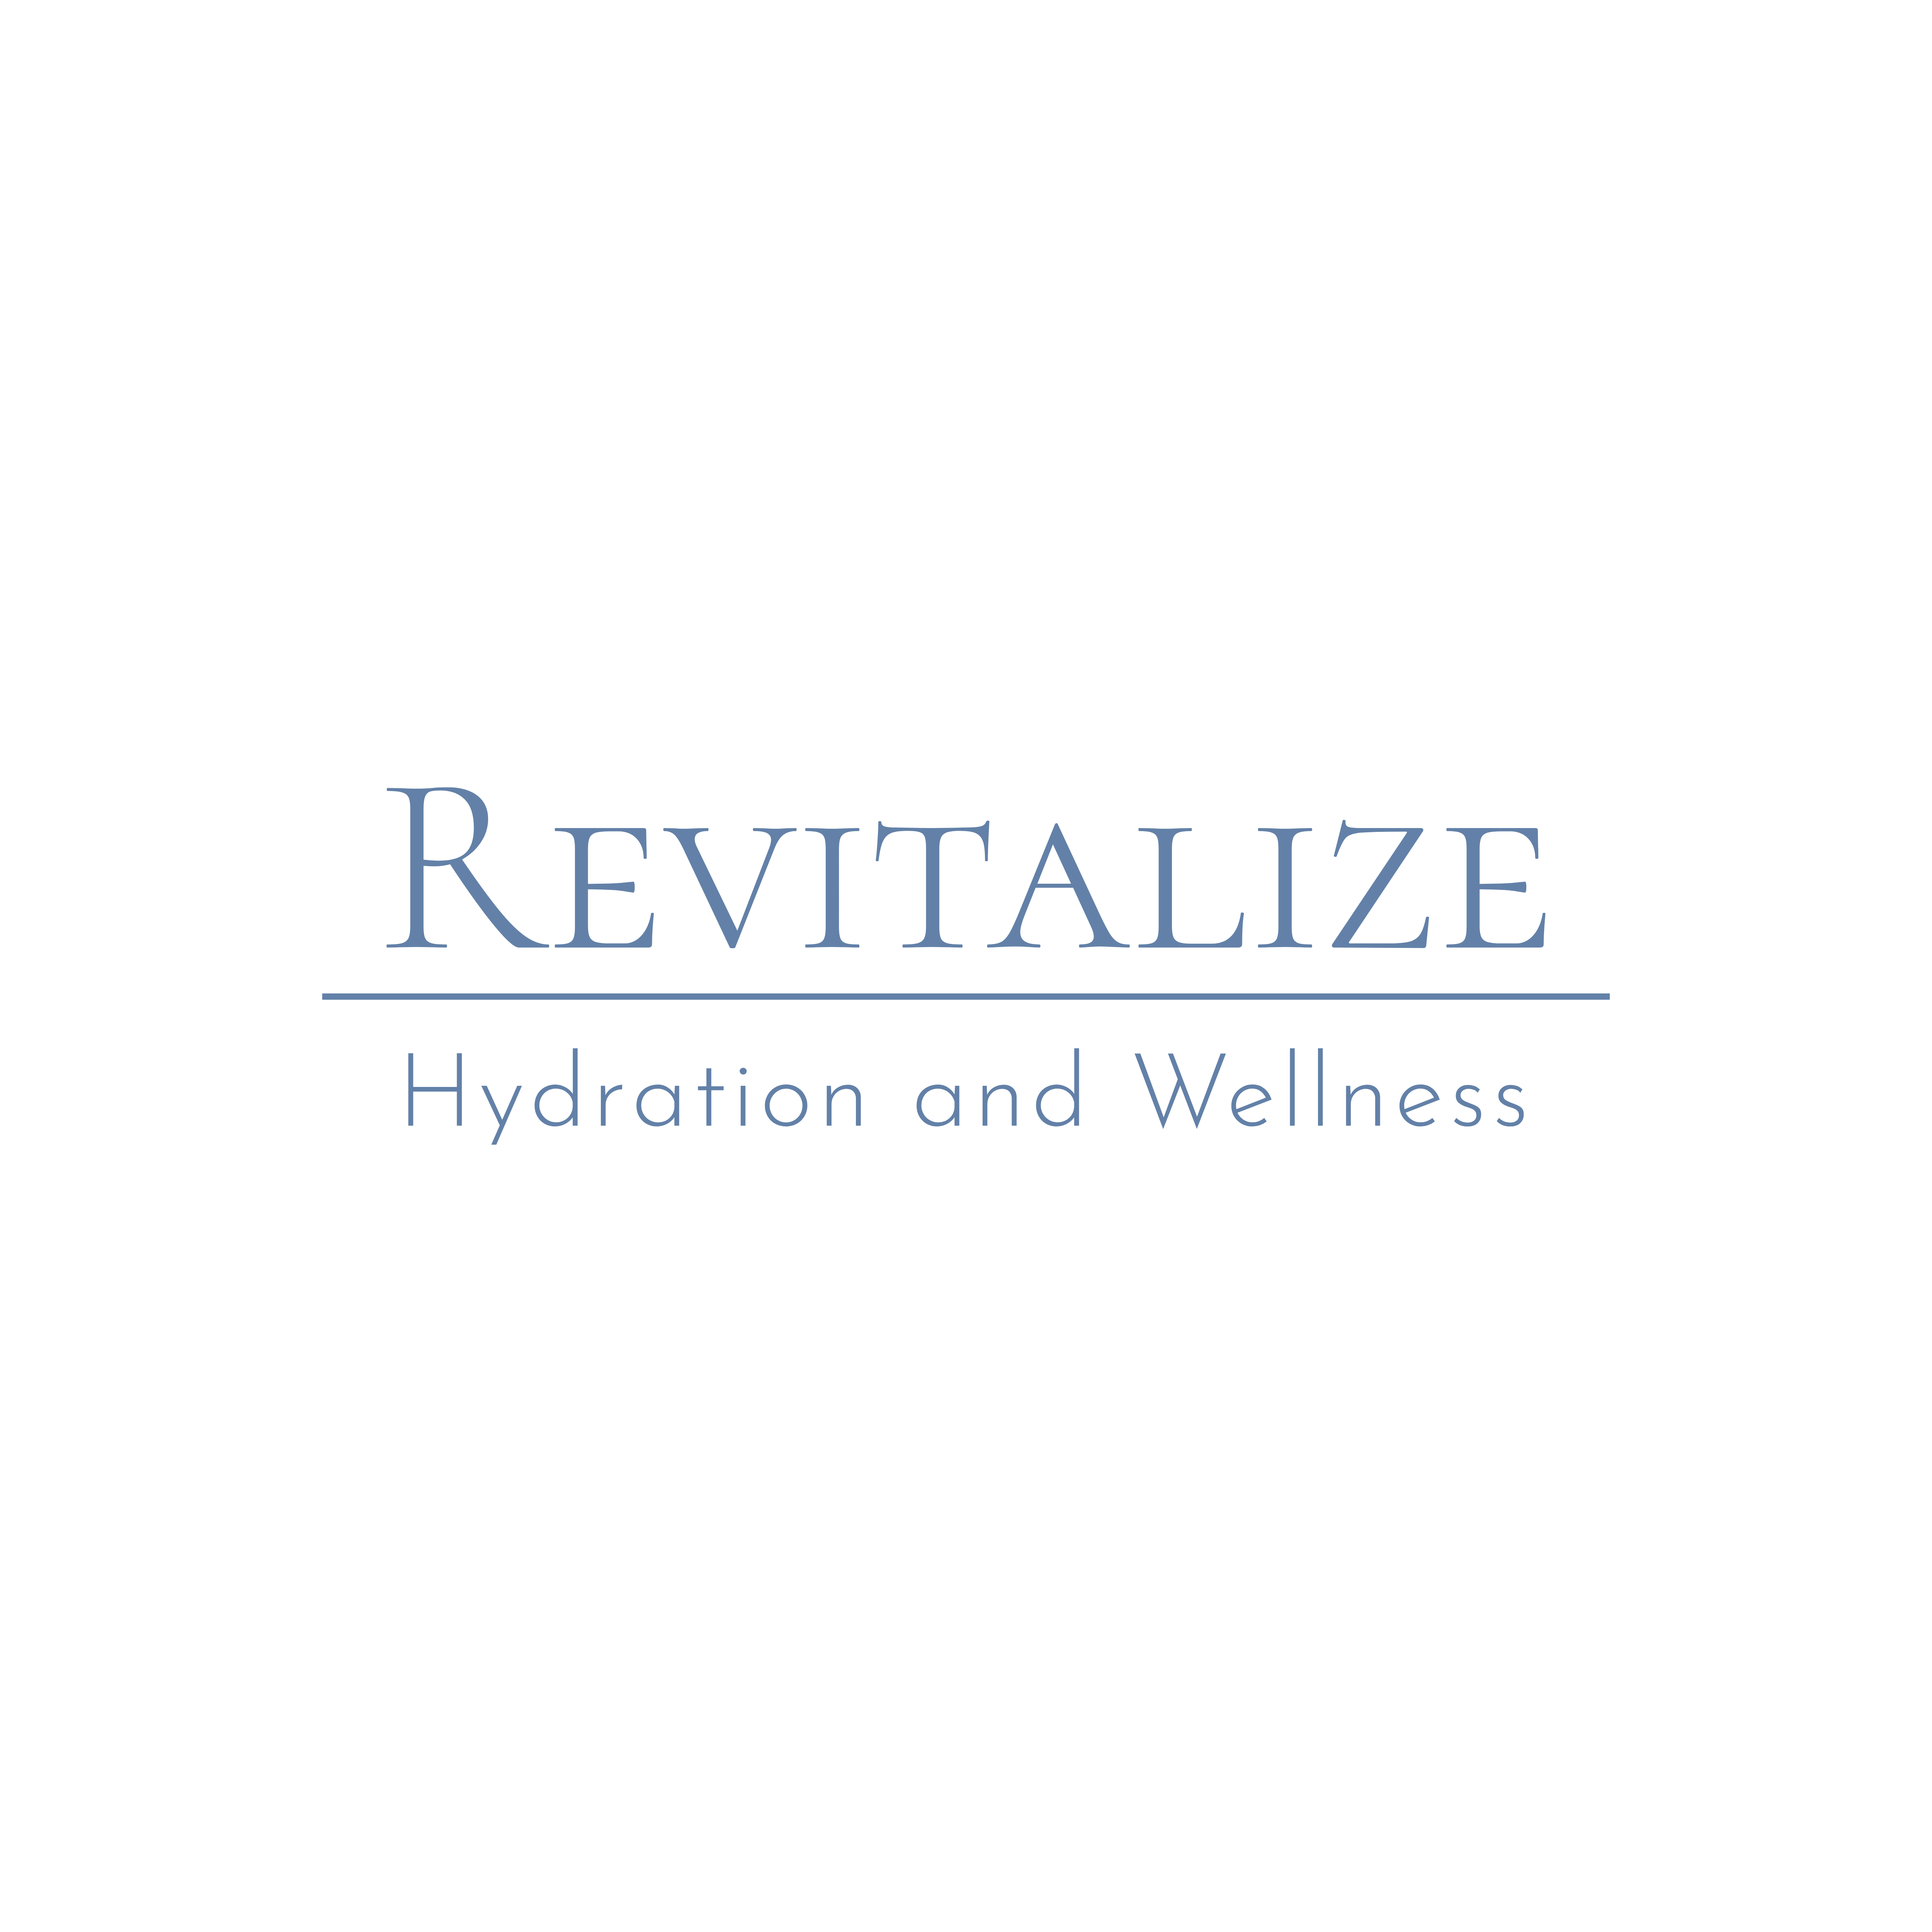 Revitalize Hydration and Wellness